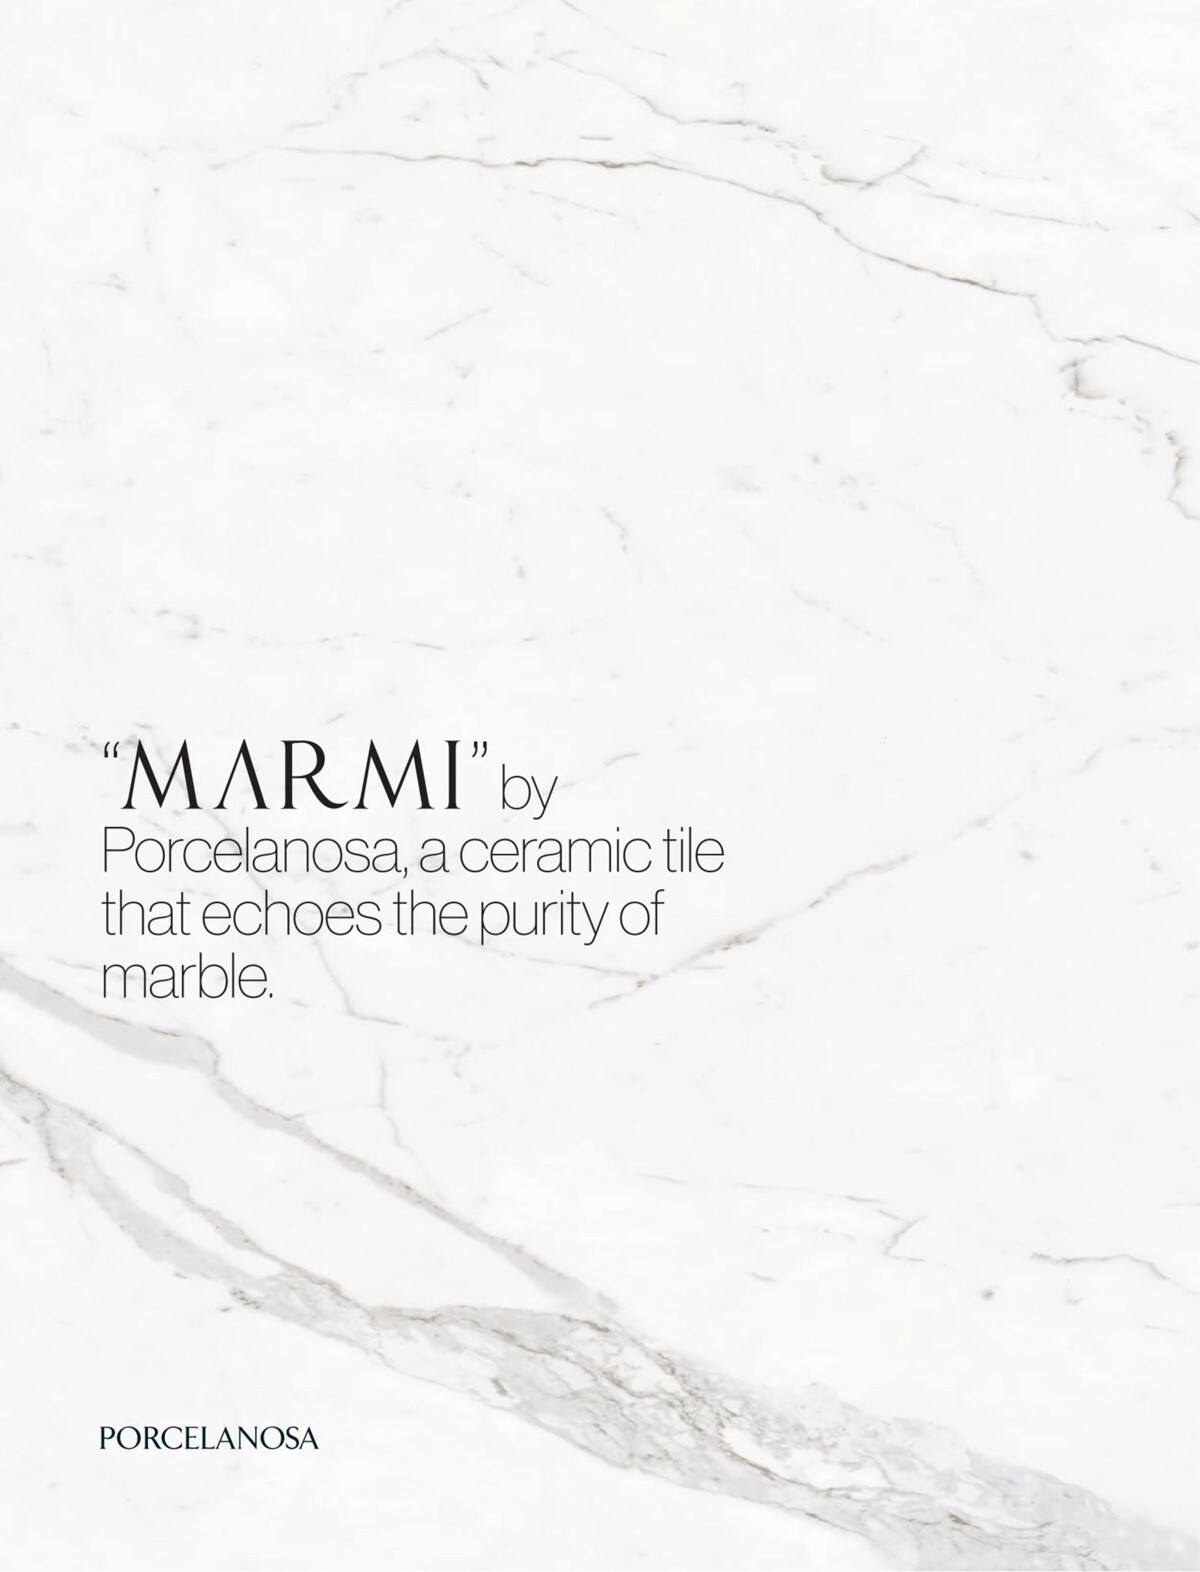 Catalogue MARMI,a ceramic tile that echoes the purity of marble, page 00001